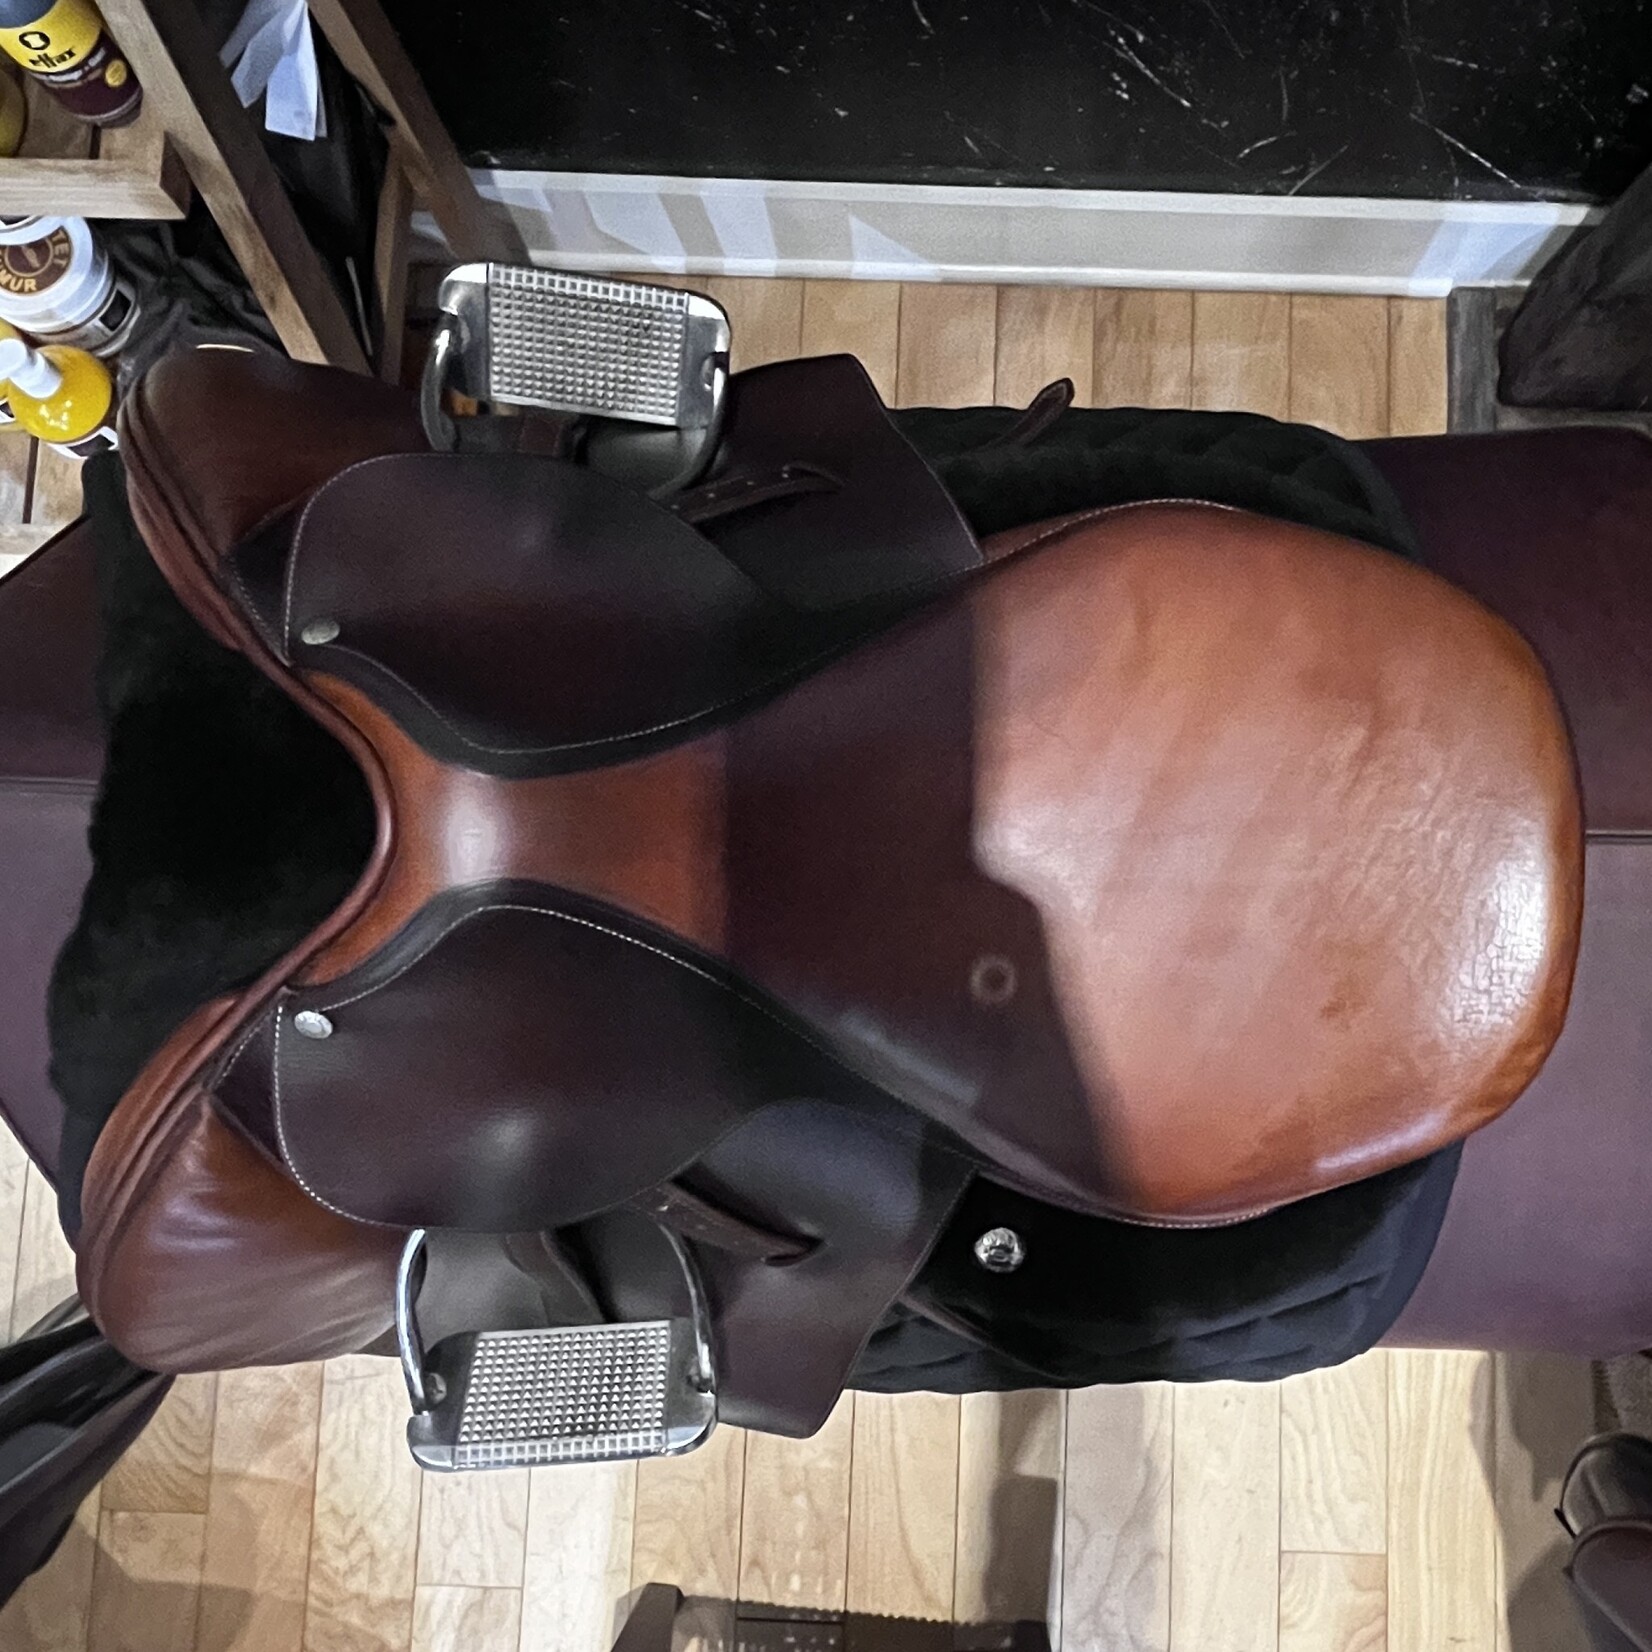 Butet #031 10 Consigned Butet Grained, 17” P Flat seat, 2 flap, standard tree, F panel, Calf seat & pad, includes 52" Butet Stirrup Leathers